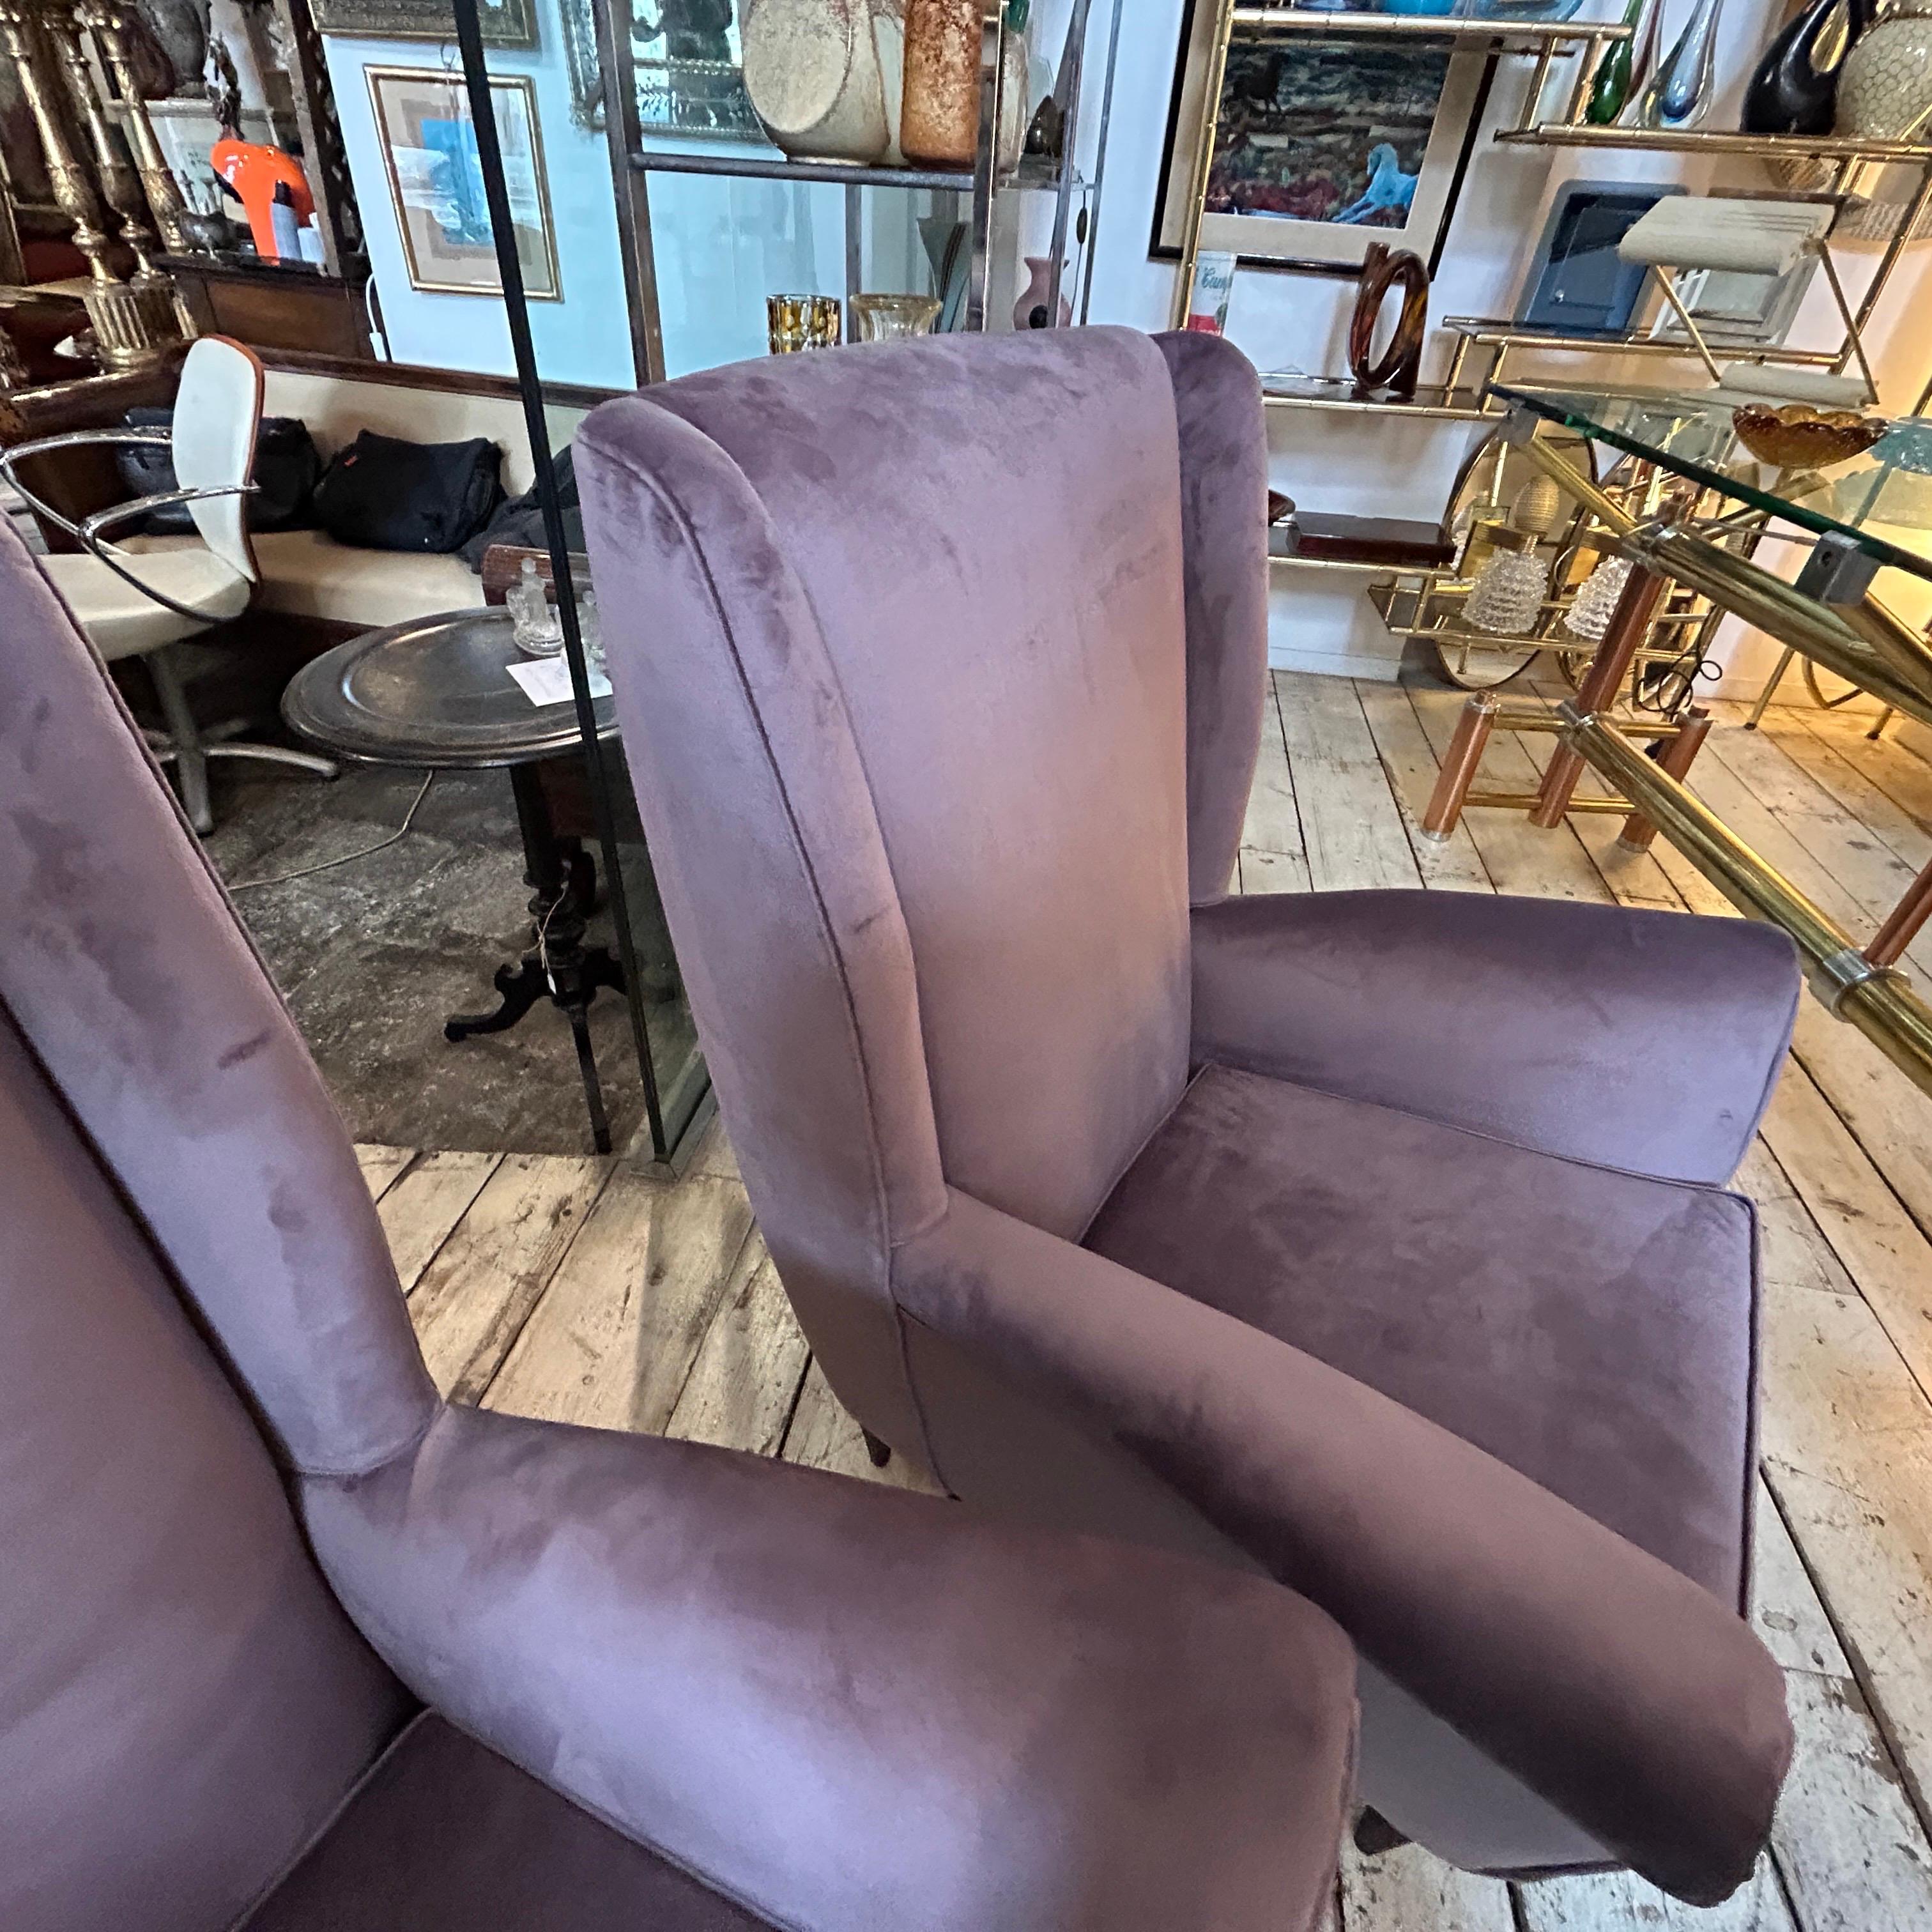 Two 1950s Gio Ponti Style Mid-Century Modern Armchairs Mod. 512 by ISA Bergamo In Good Condition For Sale In Aci Castello, IT